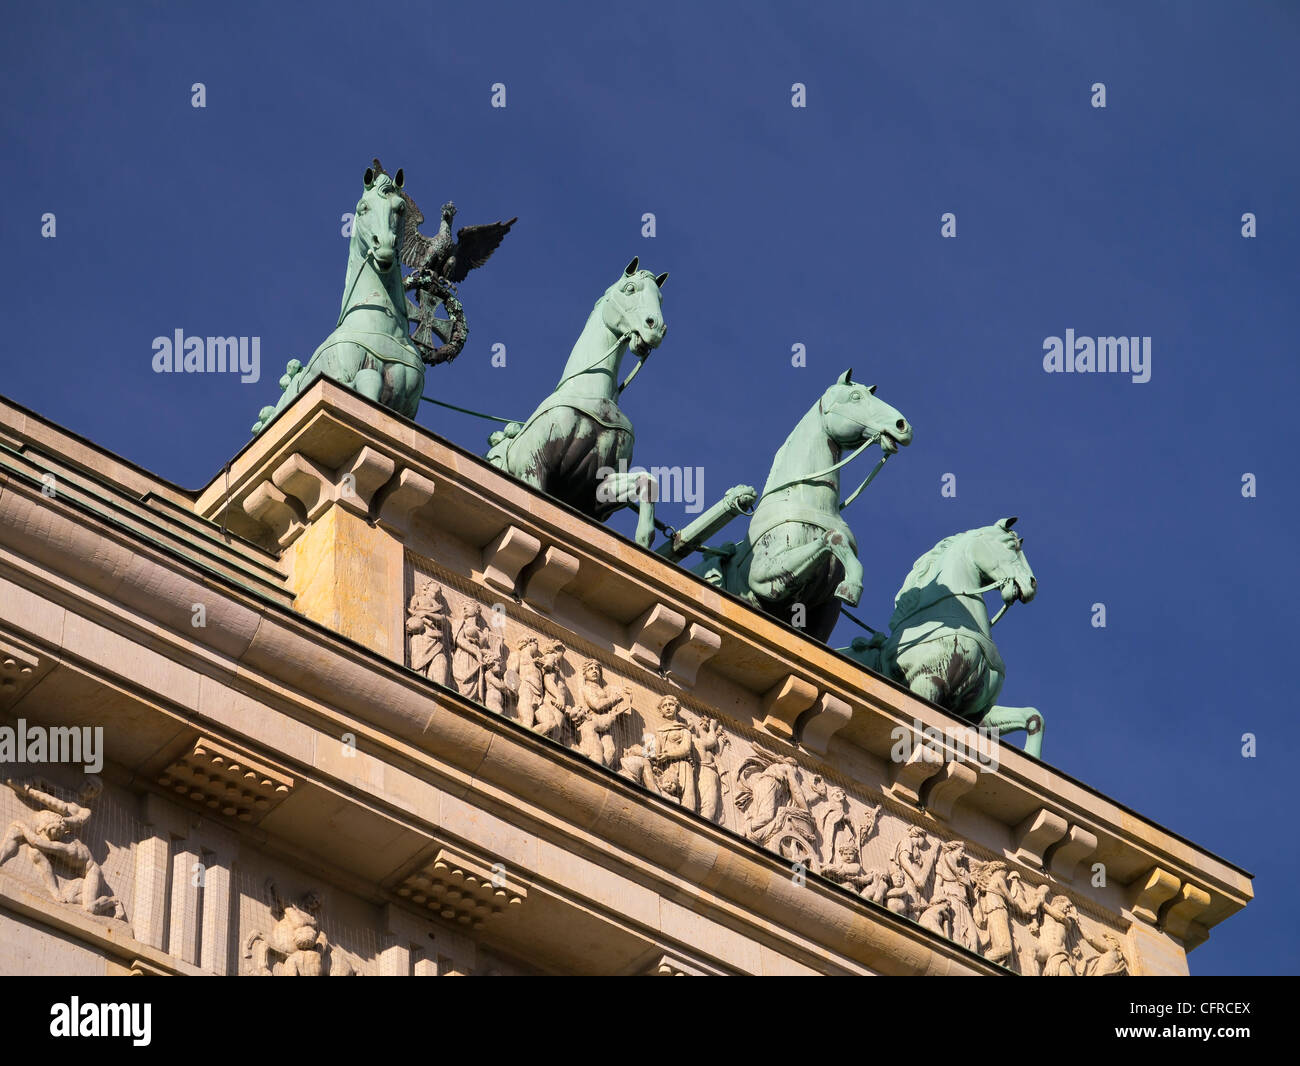 Detail of the Quadriga (four horse chariot) statue on the Brandenburg Gate, Berlin Germany. Stock Photo